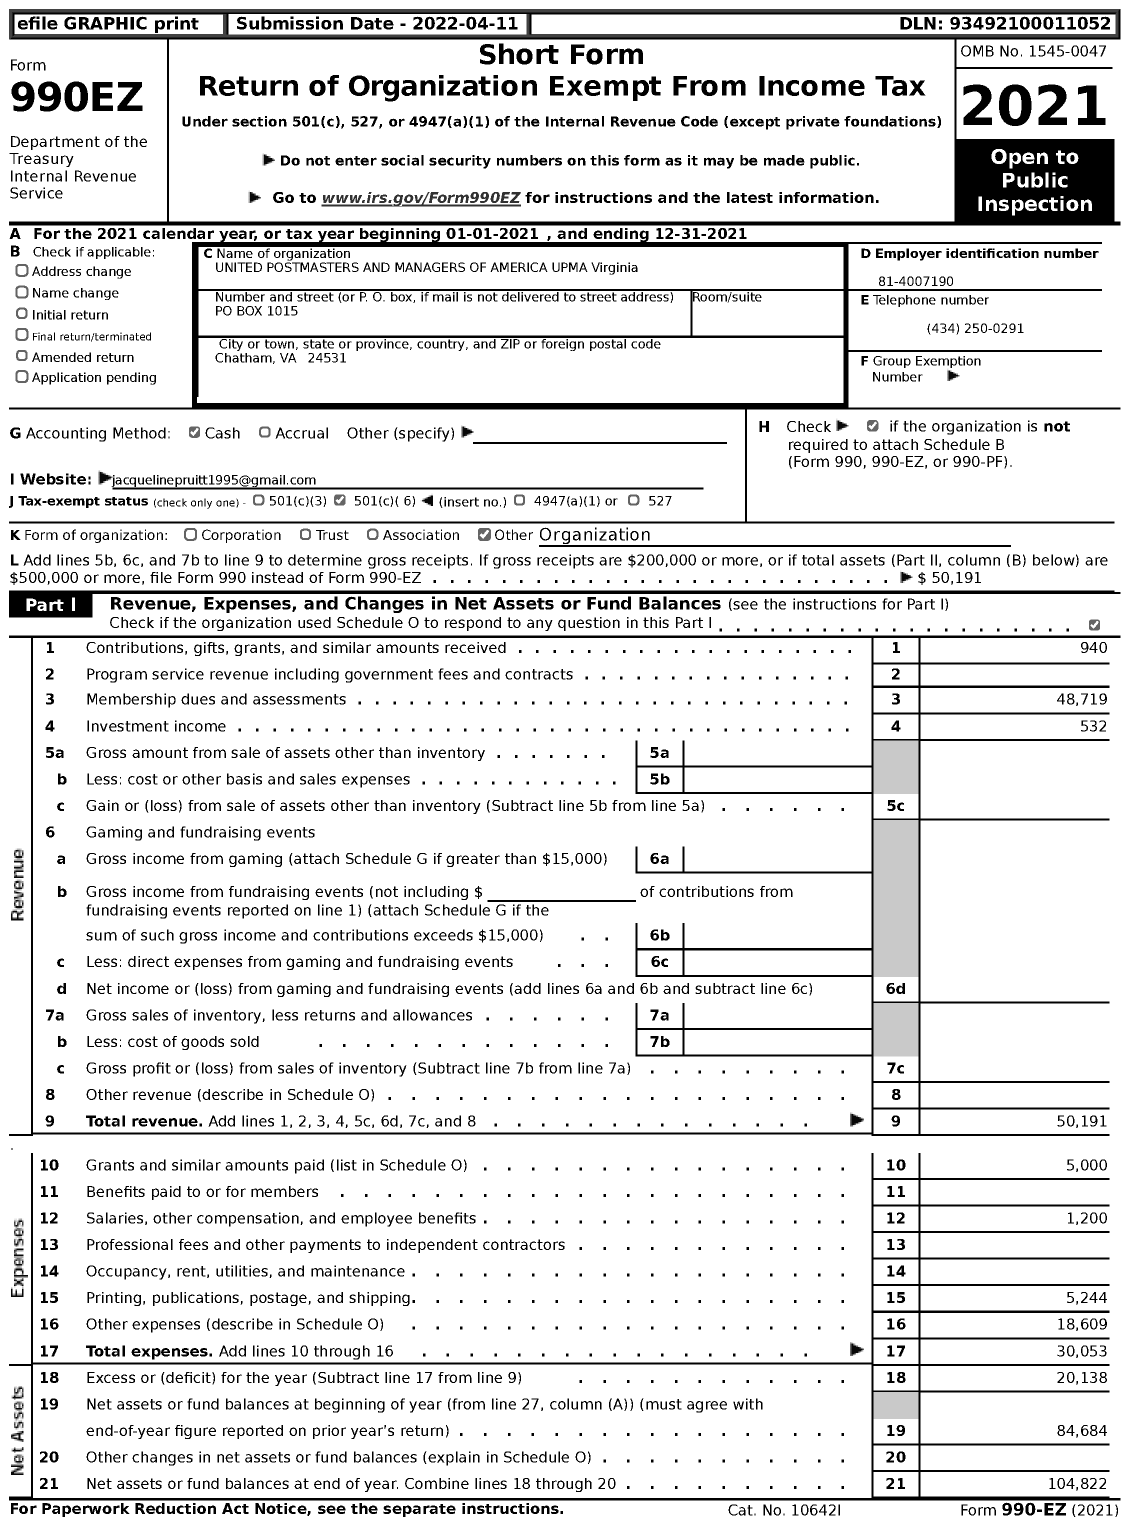 Image of first page of 2021 Form 990EZ for UNITED POSTMASTERS AND MANAGERS OF UPMA Virginia